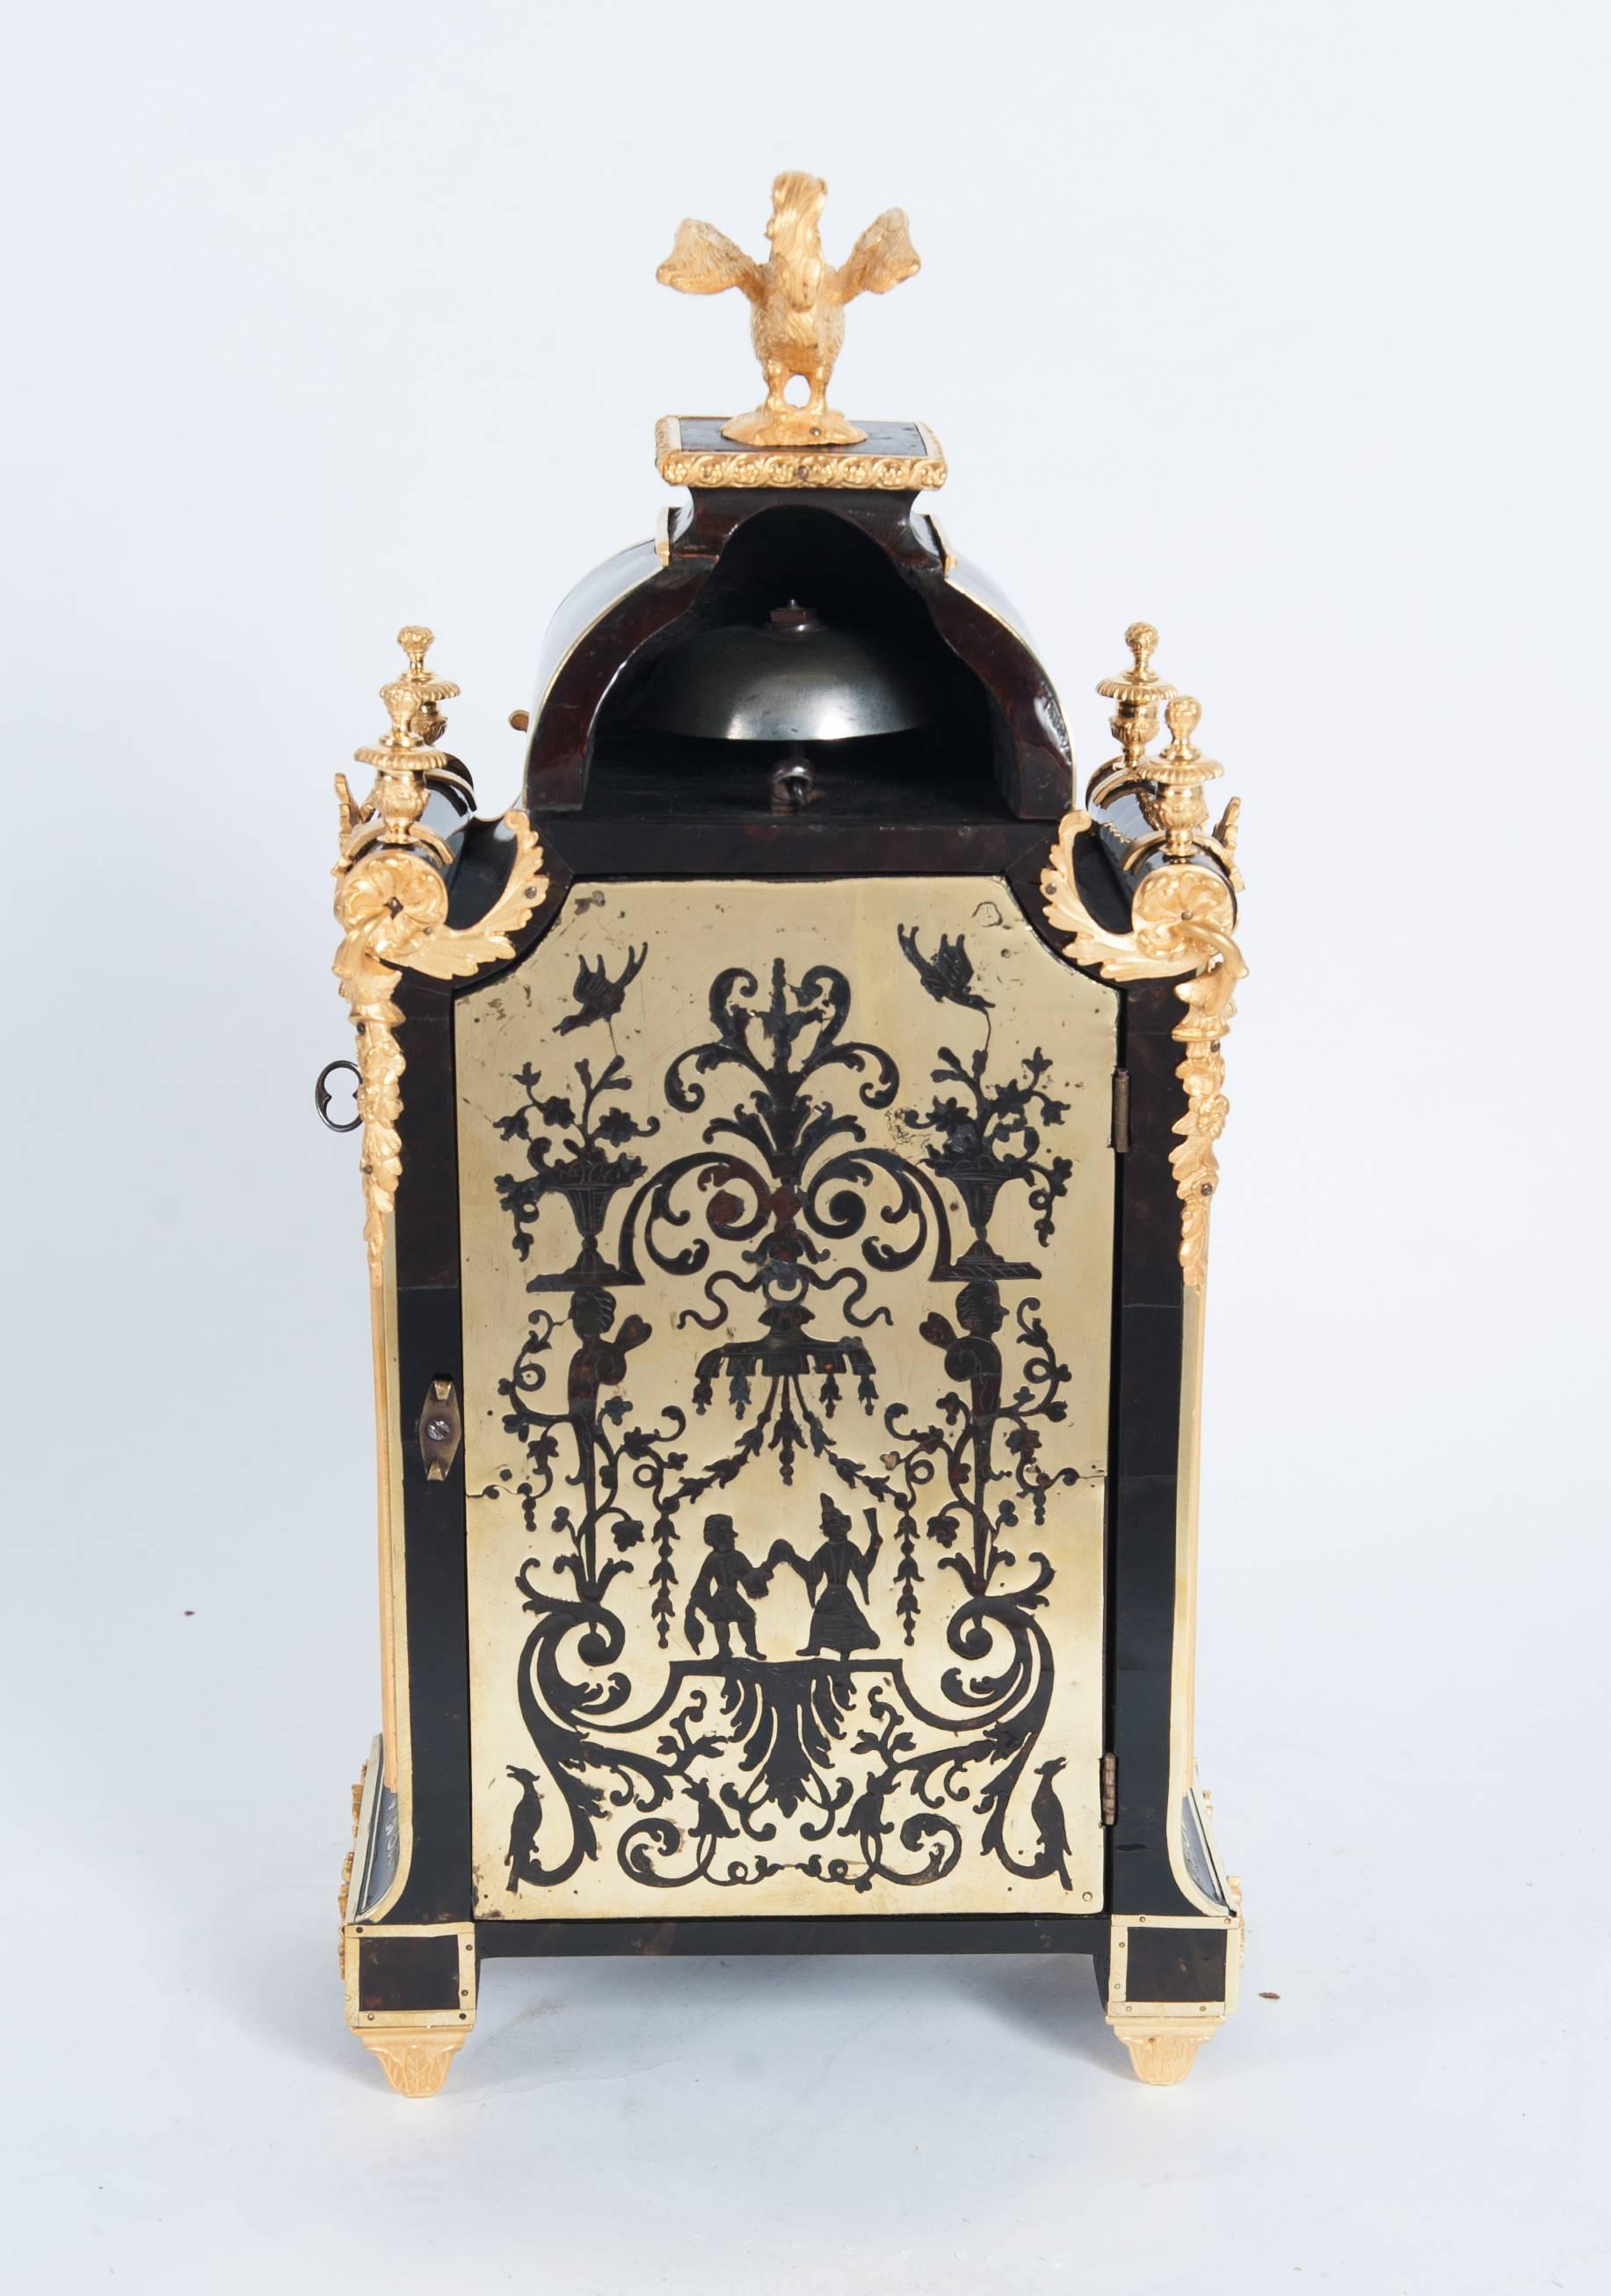 A small decorative Louis XIV boulle inlaid bracket clock, circa 1720 with matching bracket. It was made in France - Besançon.
Going and striking mechanism on one train 8-day movement with verge escapement. Signed Dumont Frères à Besançon.